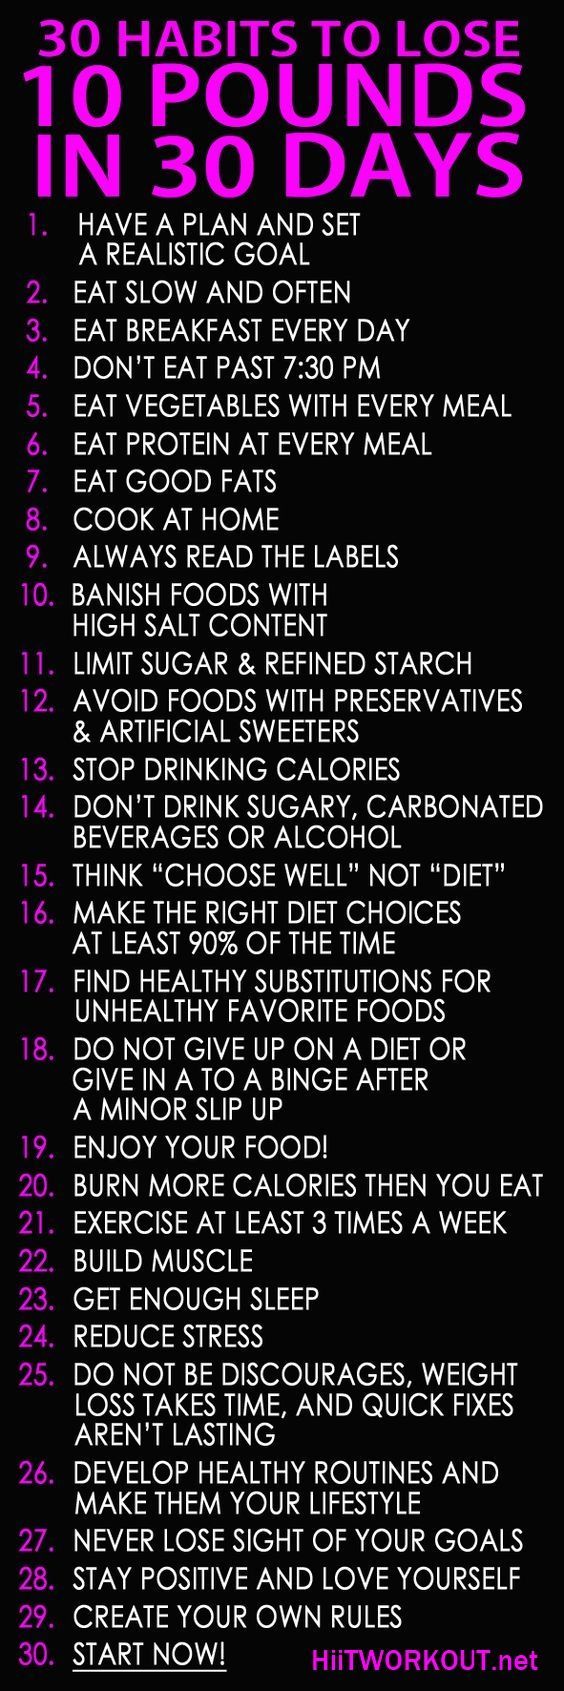 30 habits to lose 10 pounds in 30 days